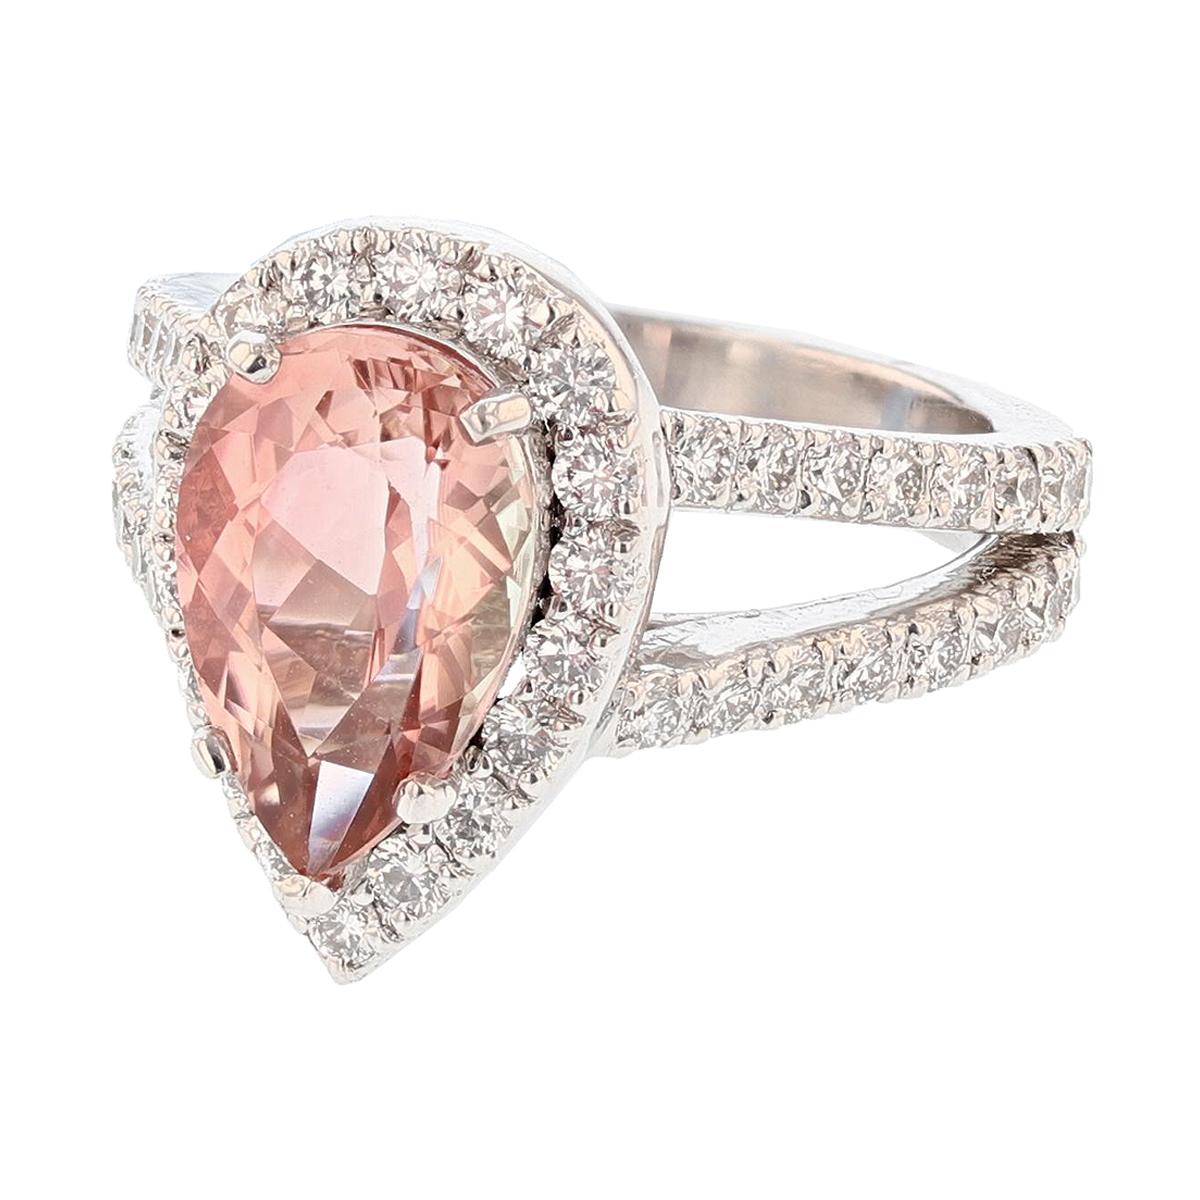 This ring is made in platinum featuring a pear shaped Pink Tourmaline weighing 3.22CT that is prong set.  The ring also features 50 round cut, prong set diamonds weighing 1.21cts with a color grade (G) and clarity grade (VS1/VS2). 